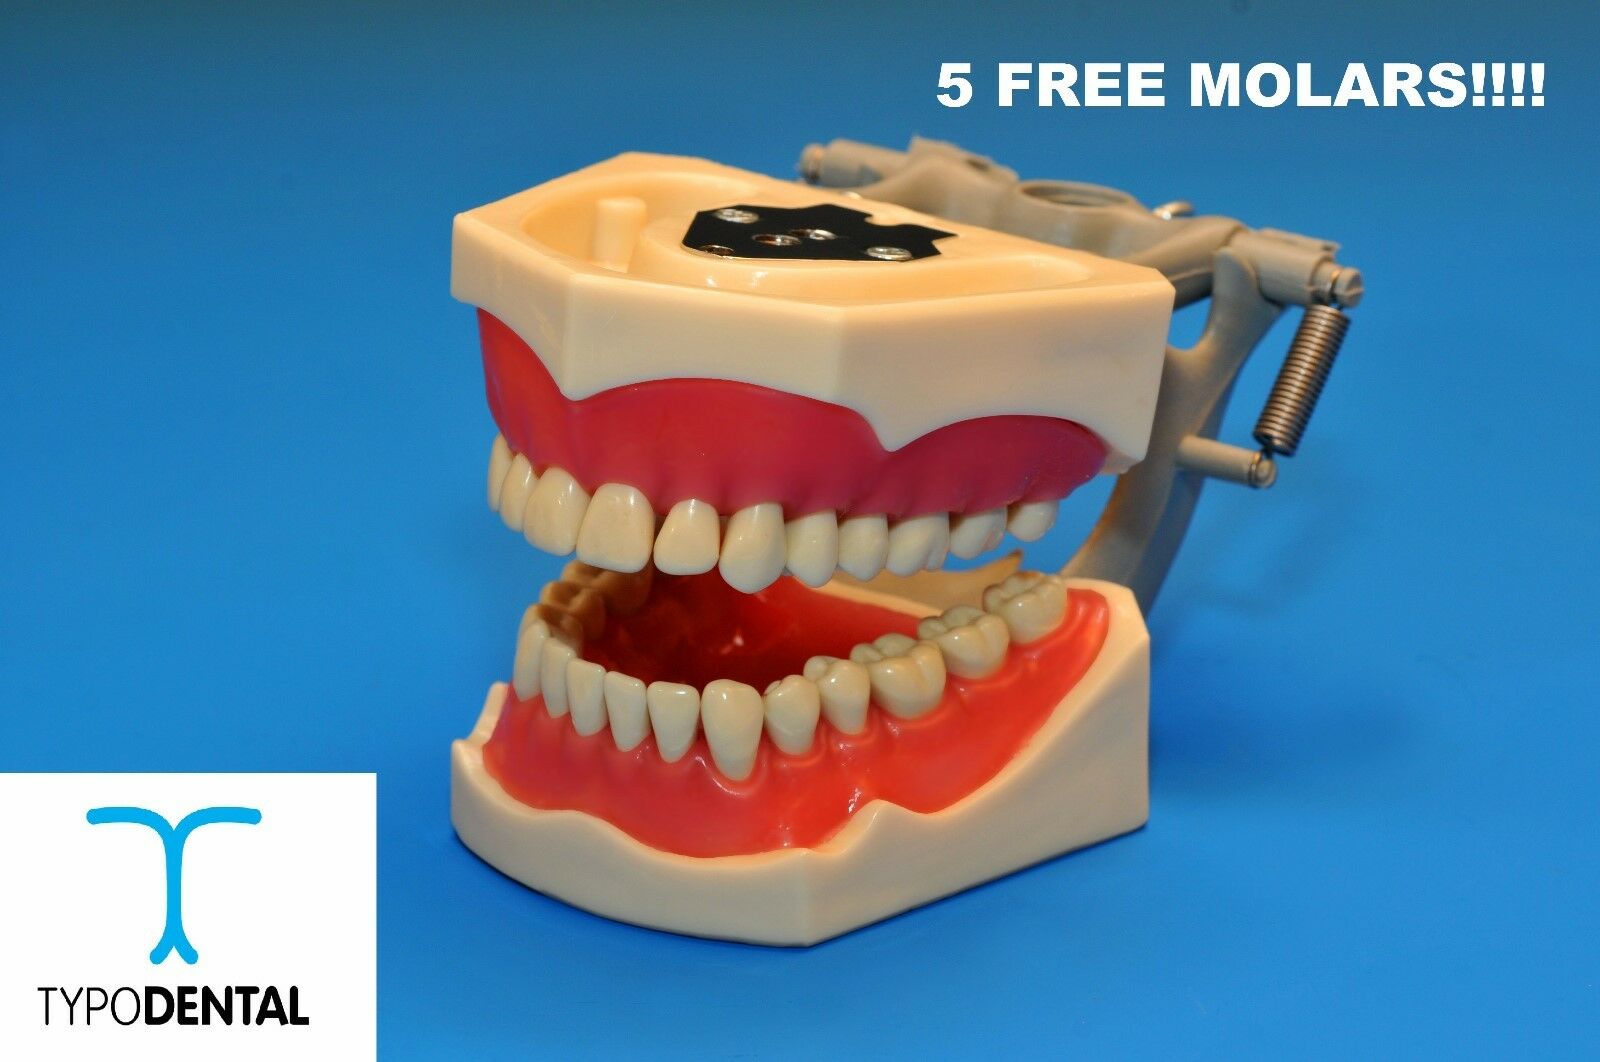 Typodont Dental Model 860 Works With Columbia Brand Teeth (5 Free Molars)